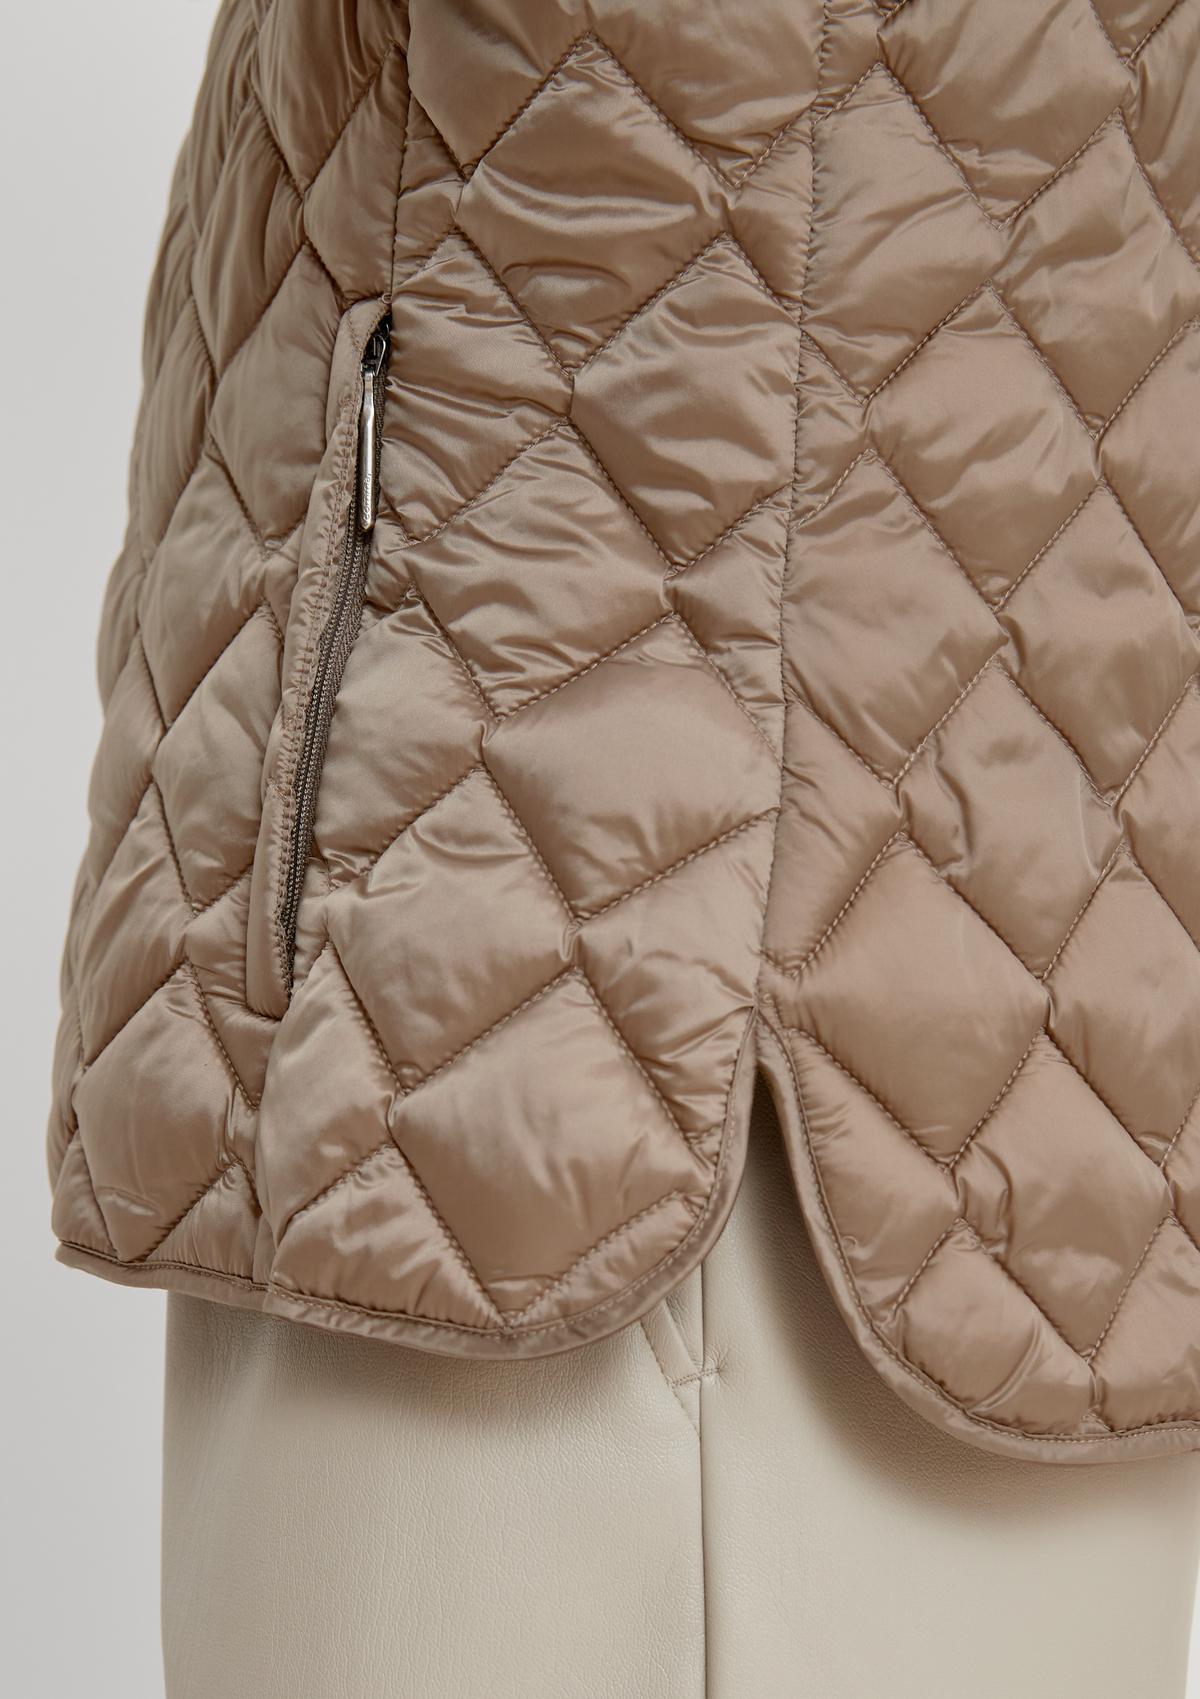 comma Body warmer with quilted diamond pattern